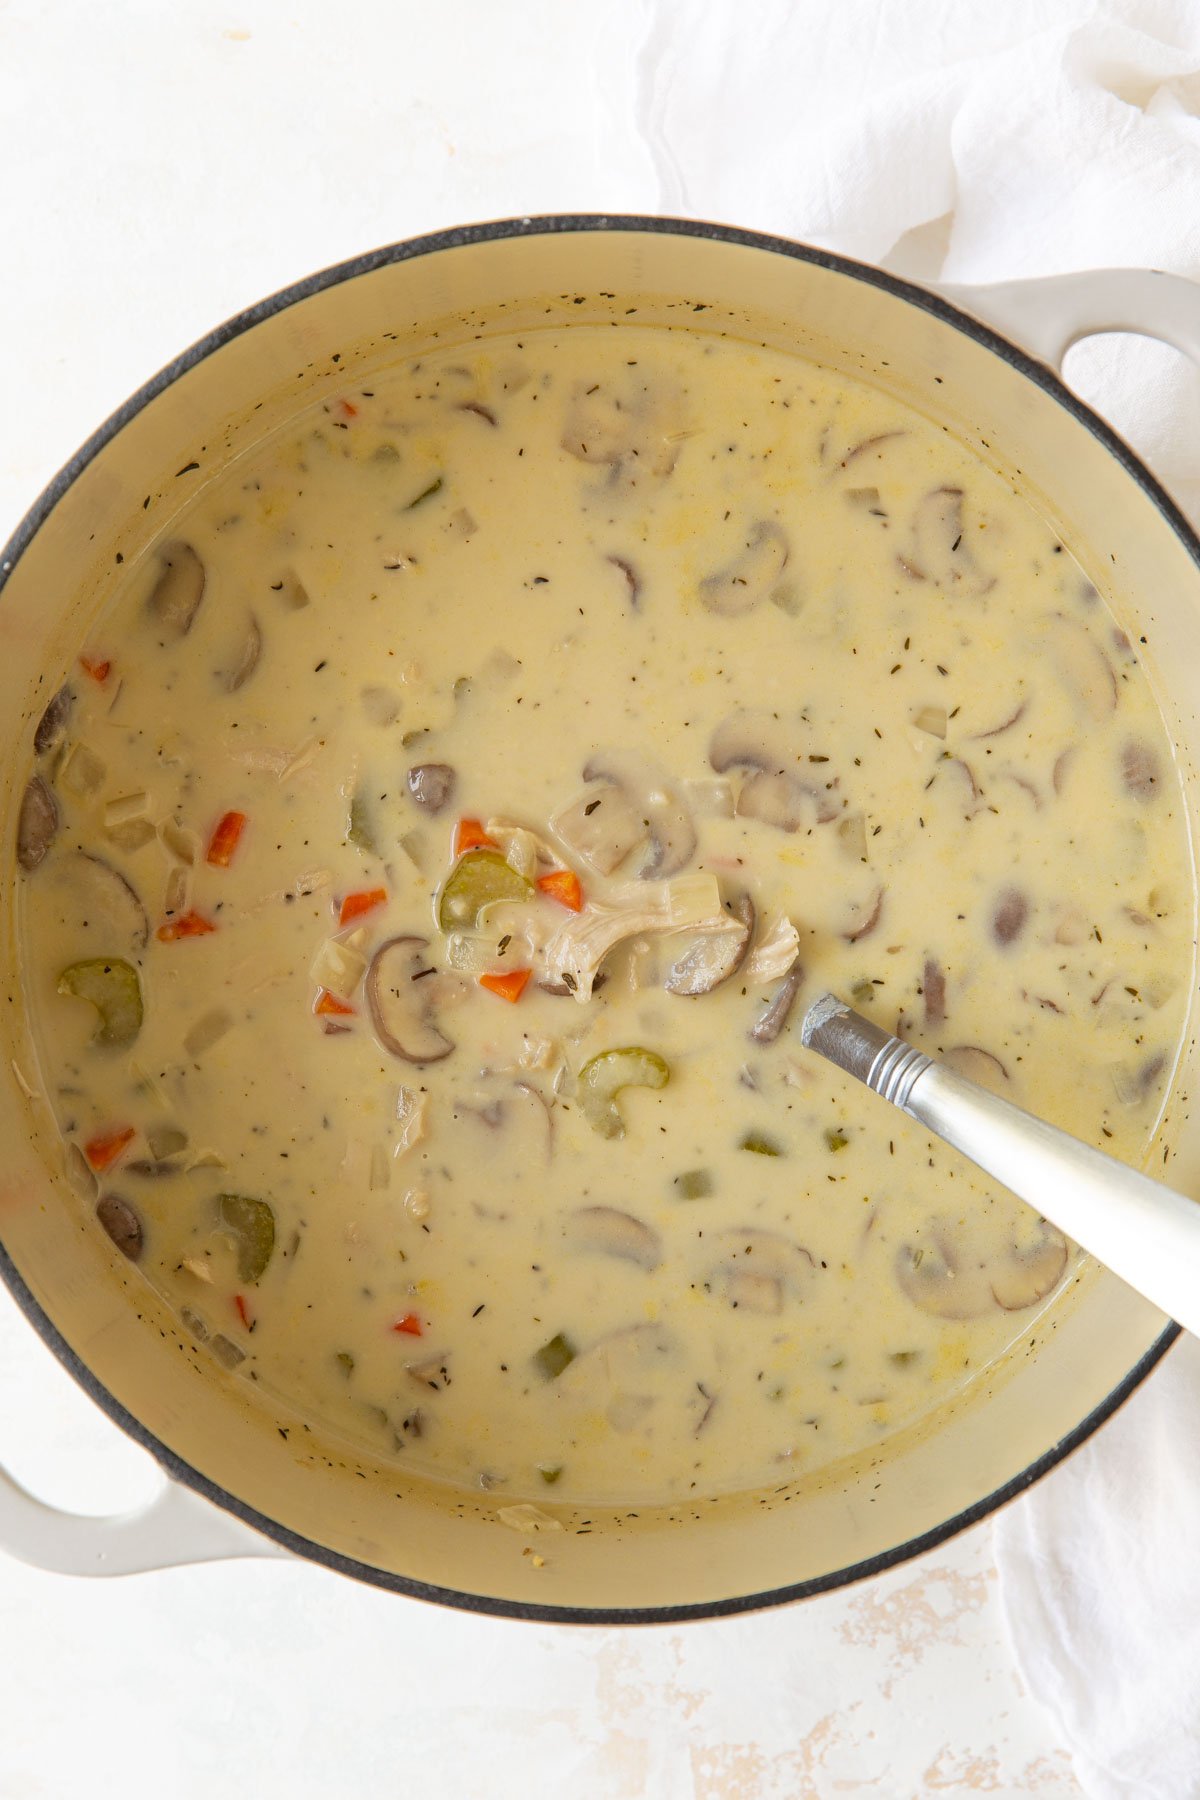 Overhead view of soup in a Dutch oven with a stainless ladle.